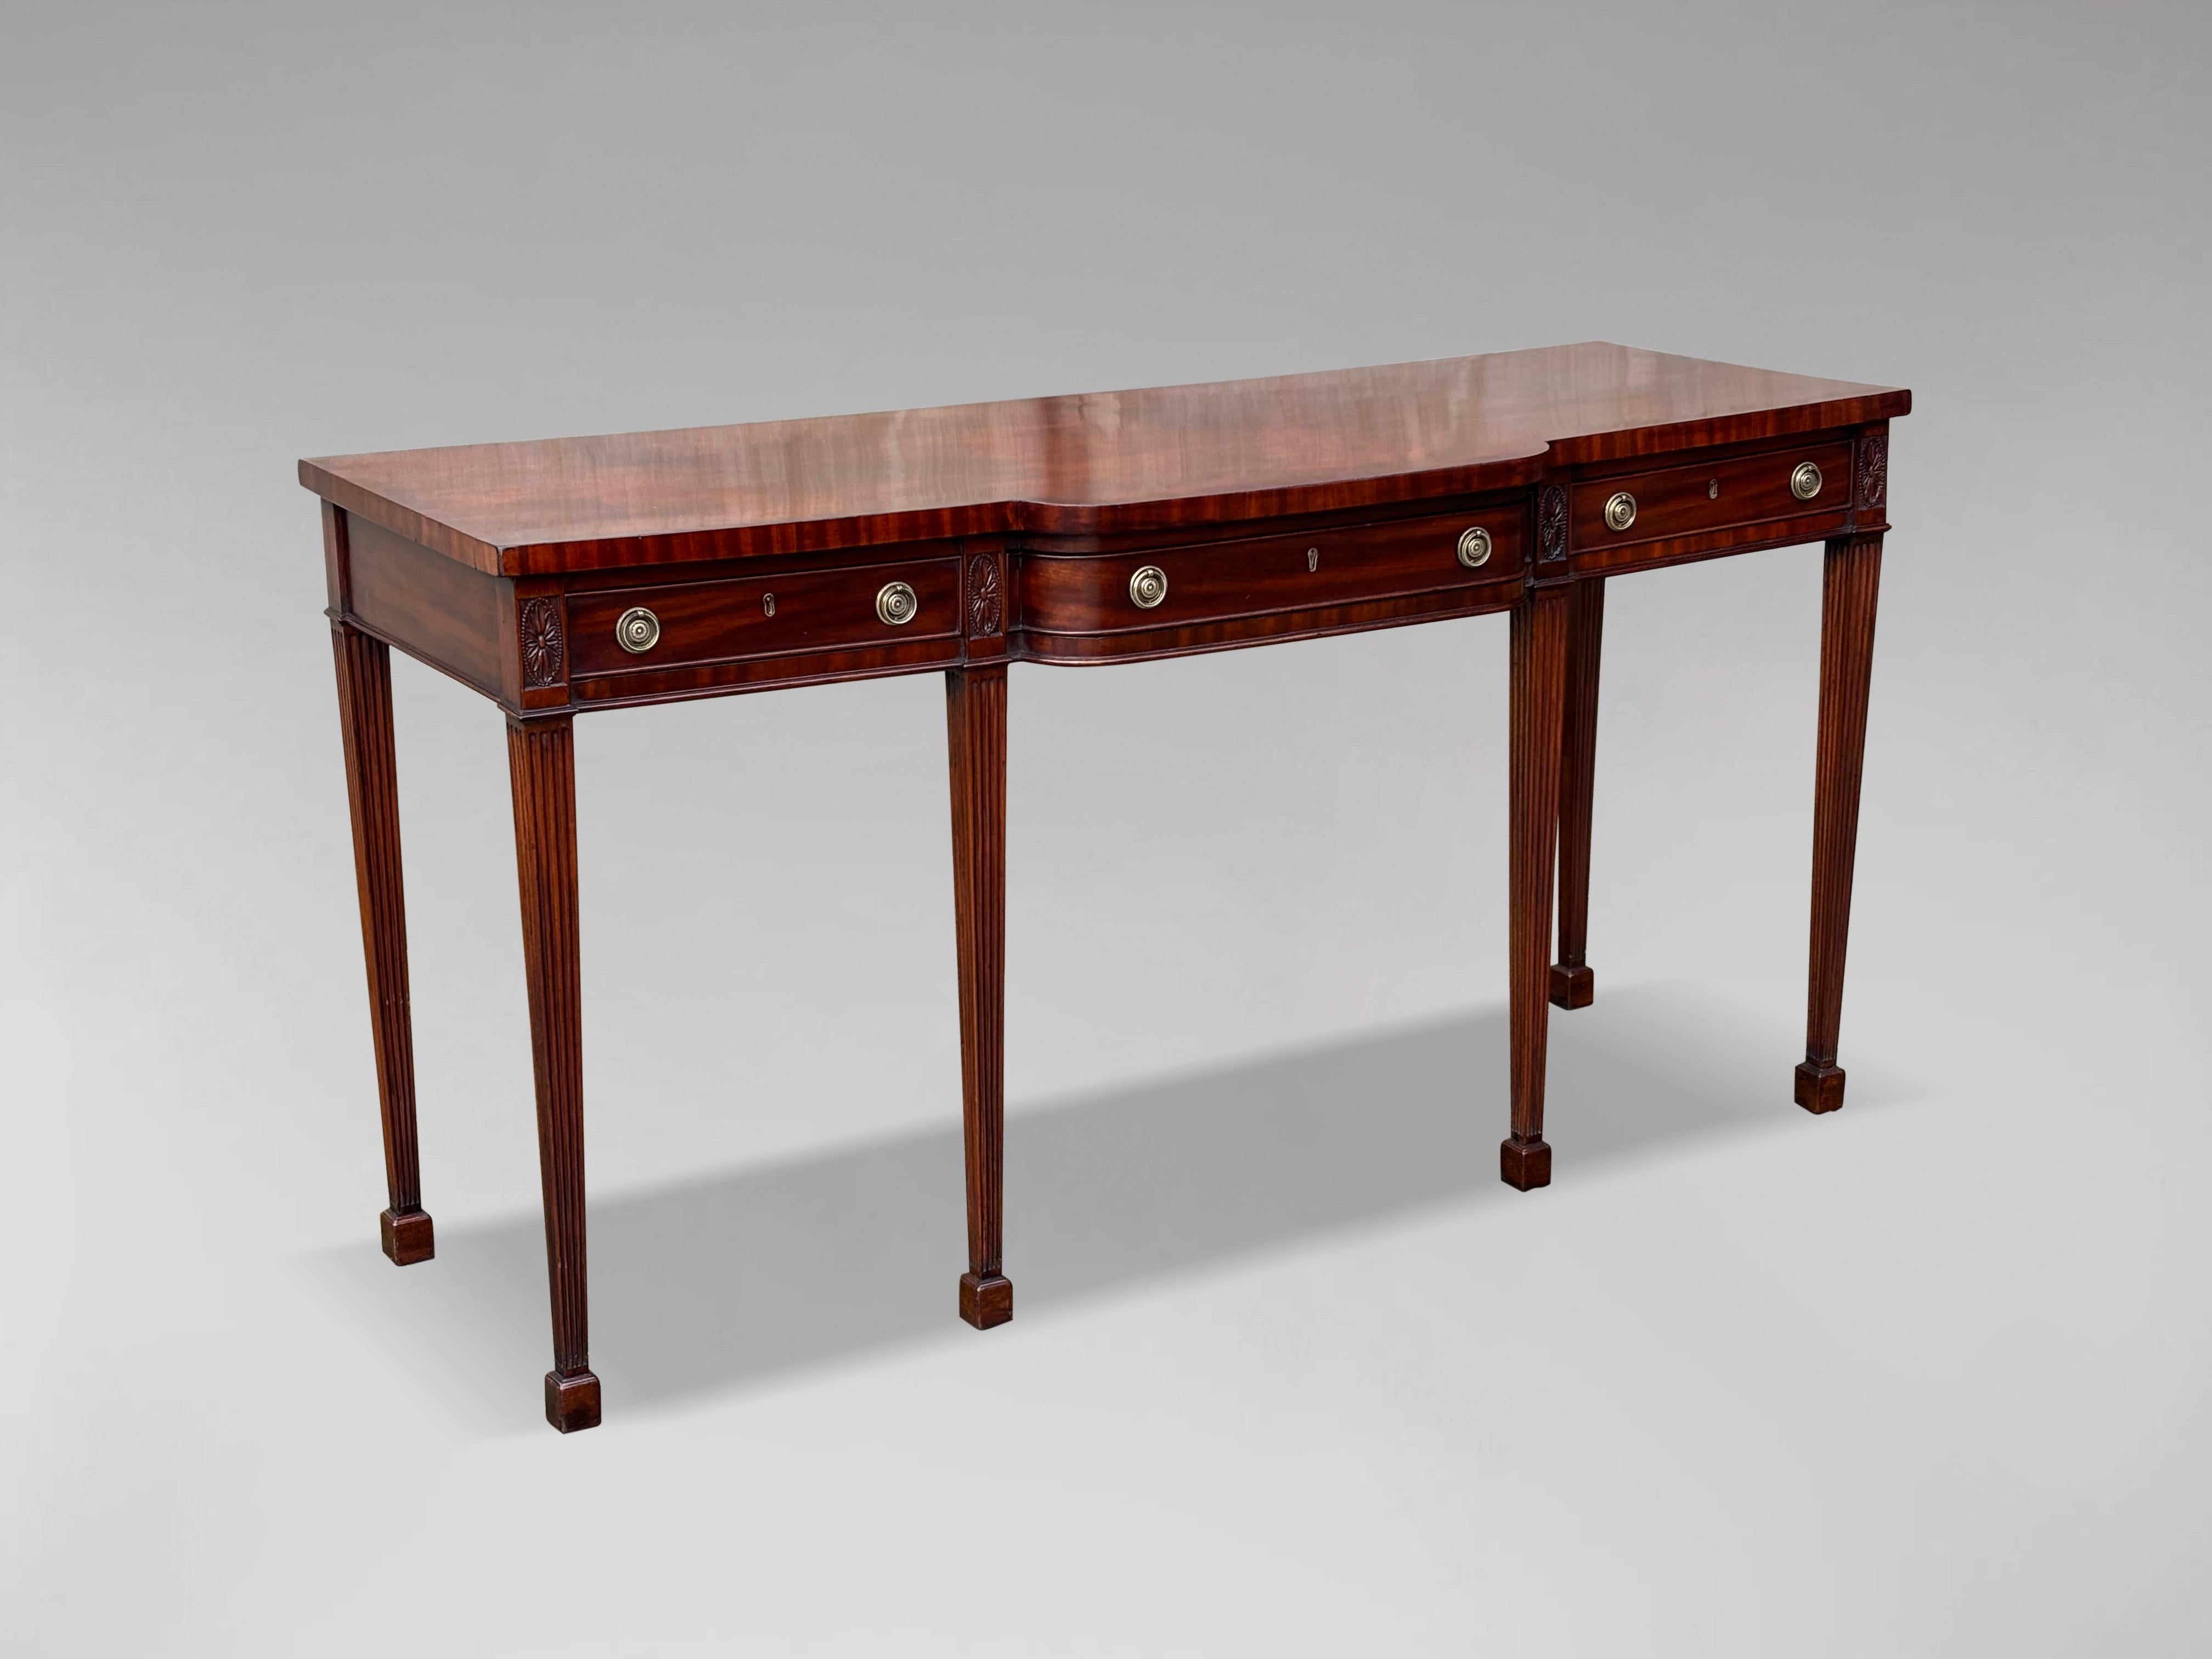 Polished Early 19th Century George III Period Mahogany Serving Table For Sale